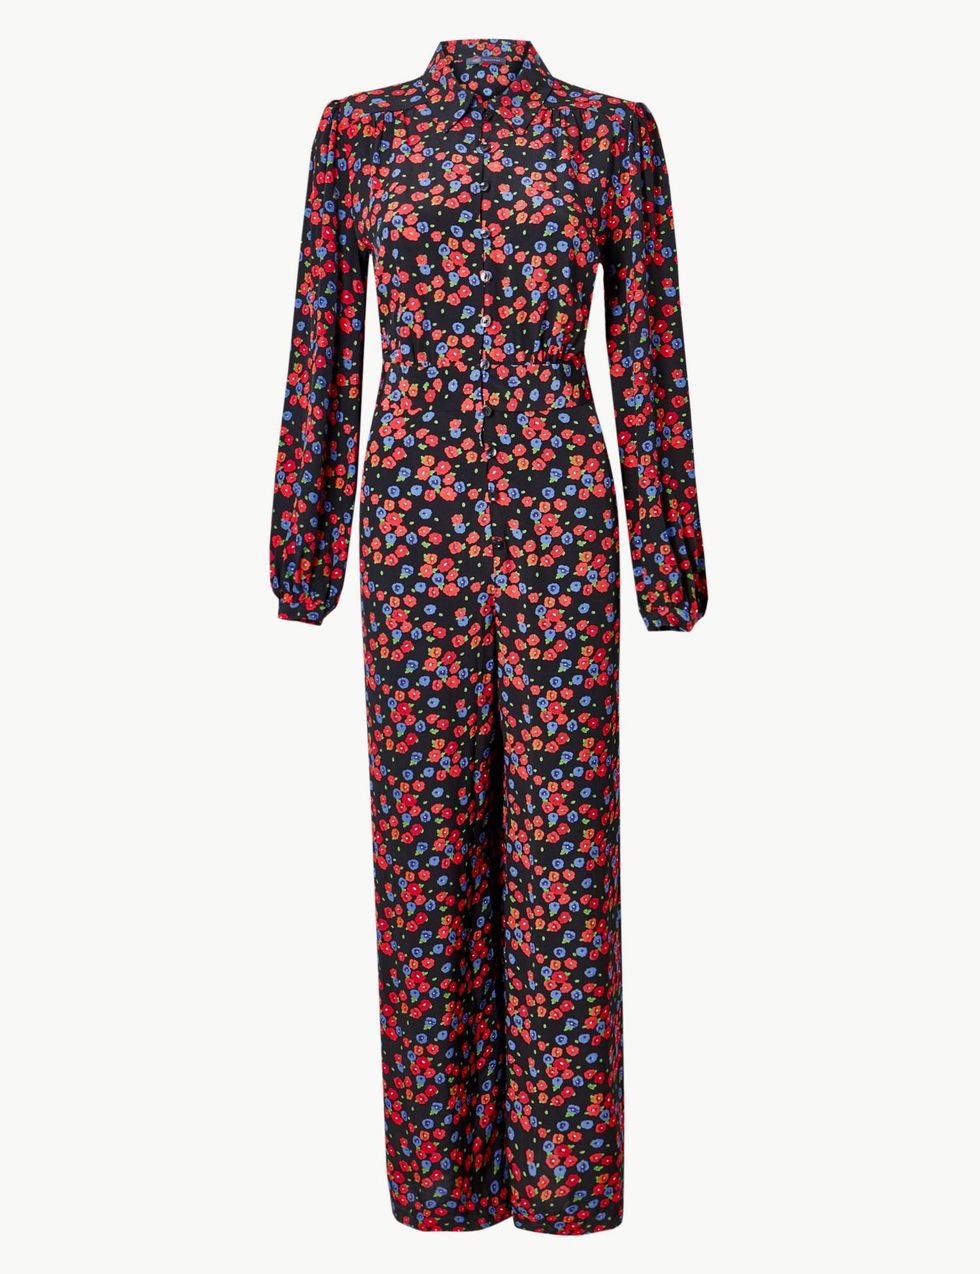 Did you spot Marks & Spencer's stunning new floral jumpsuit?